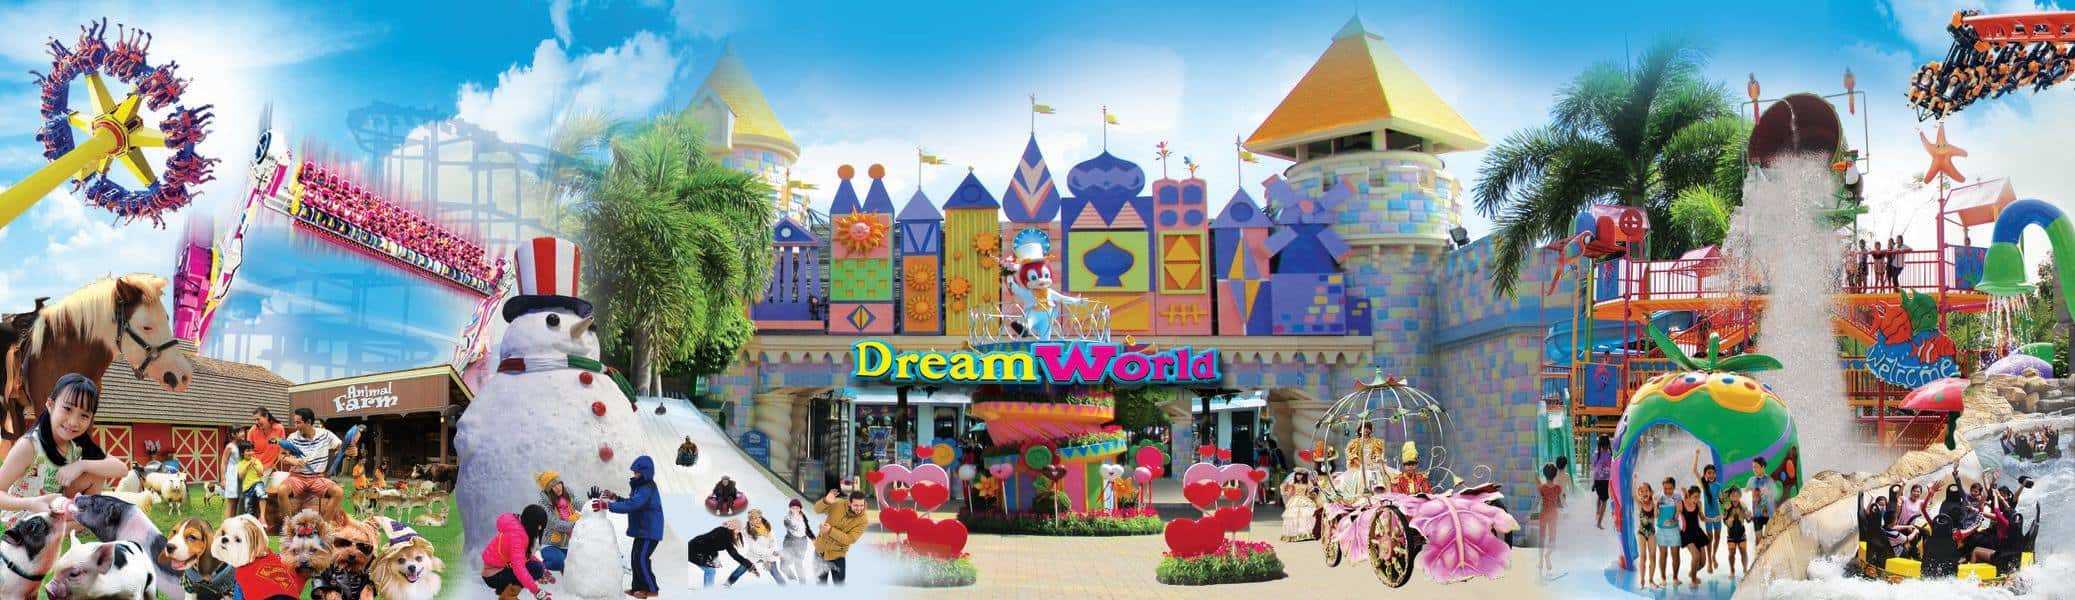 theme parks in Thailand